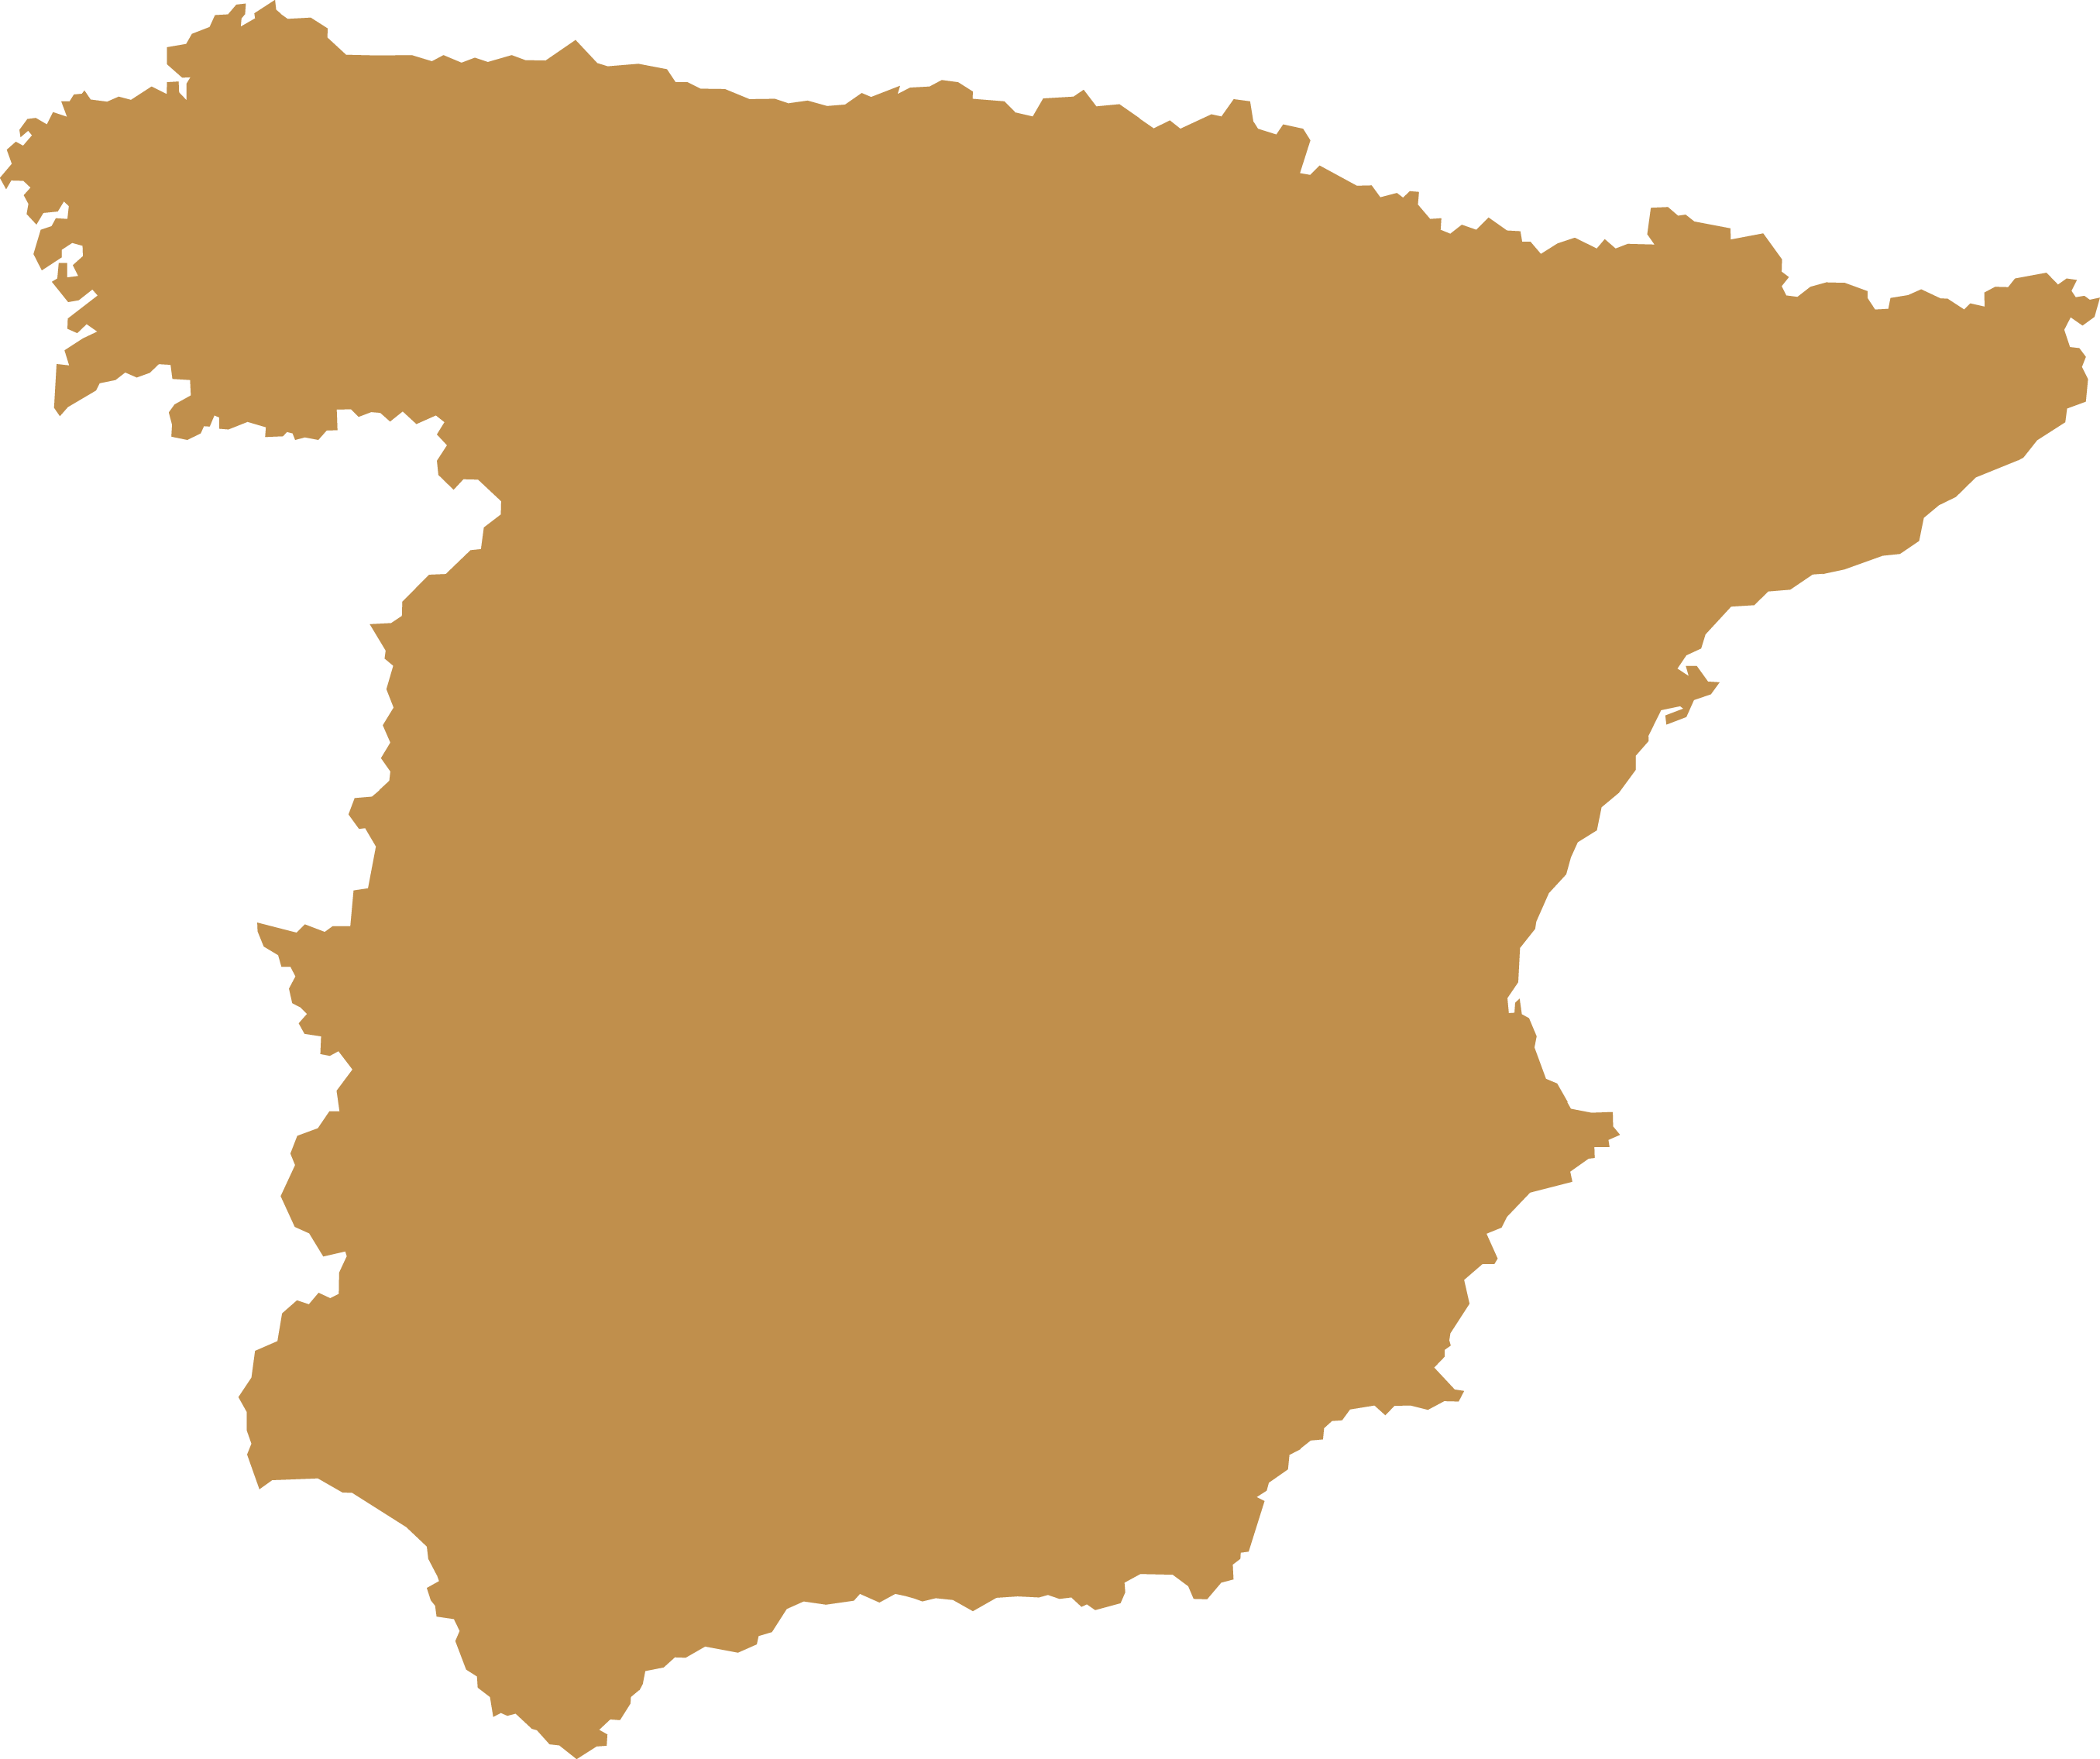 clipart map of spain - photo #10